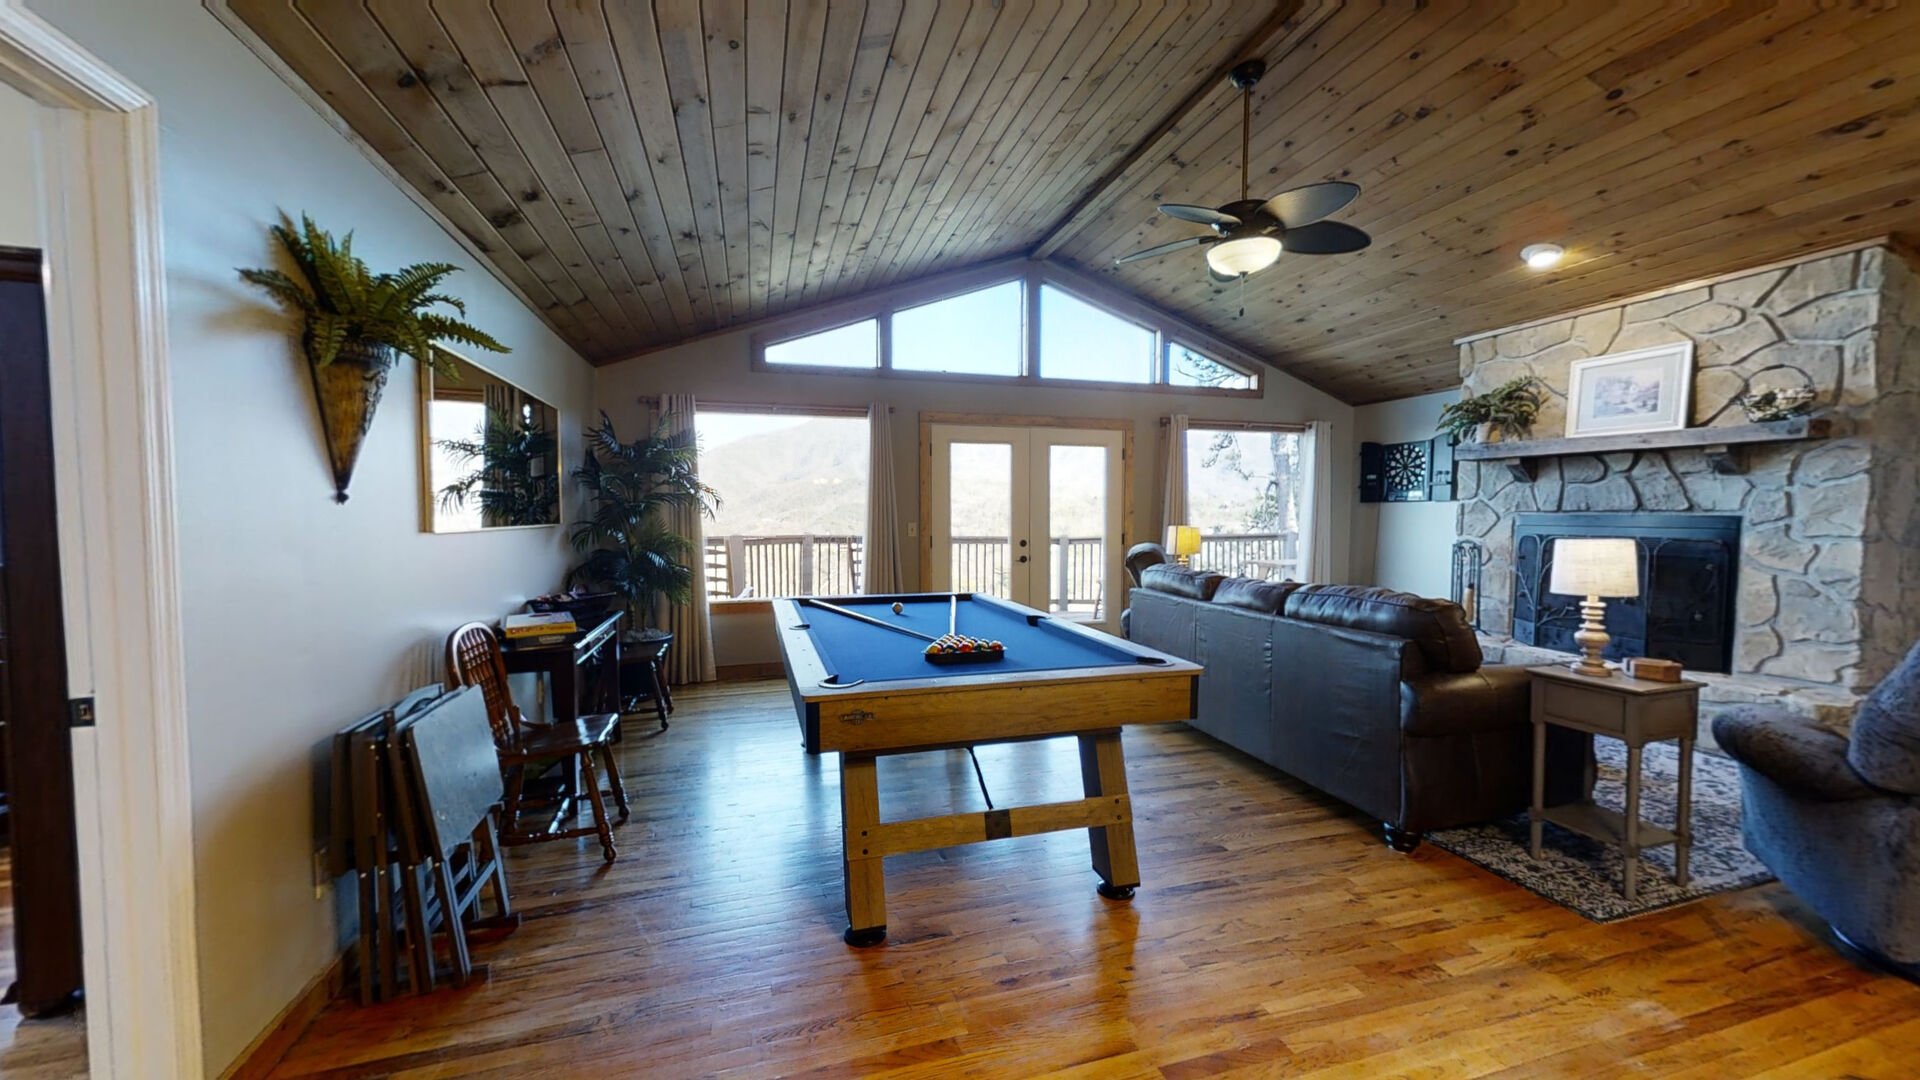 Living area with Pool Table